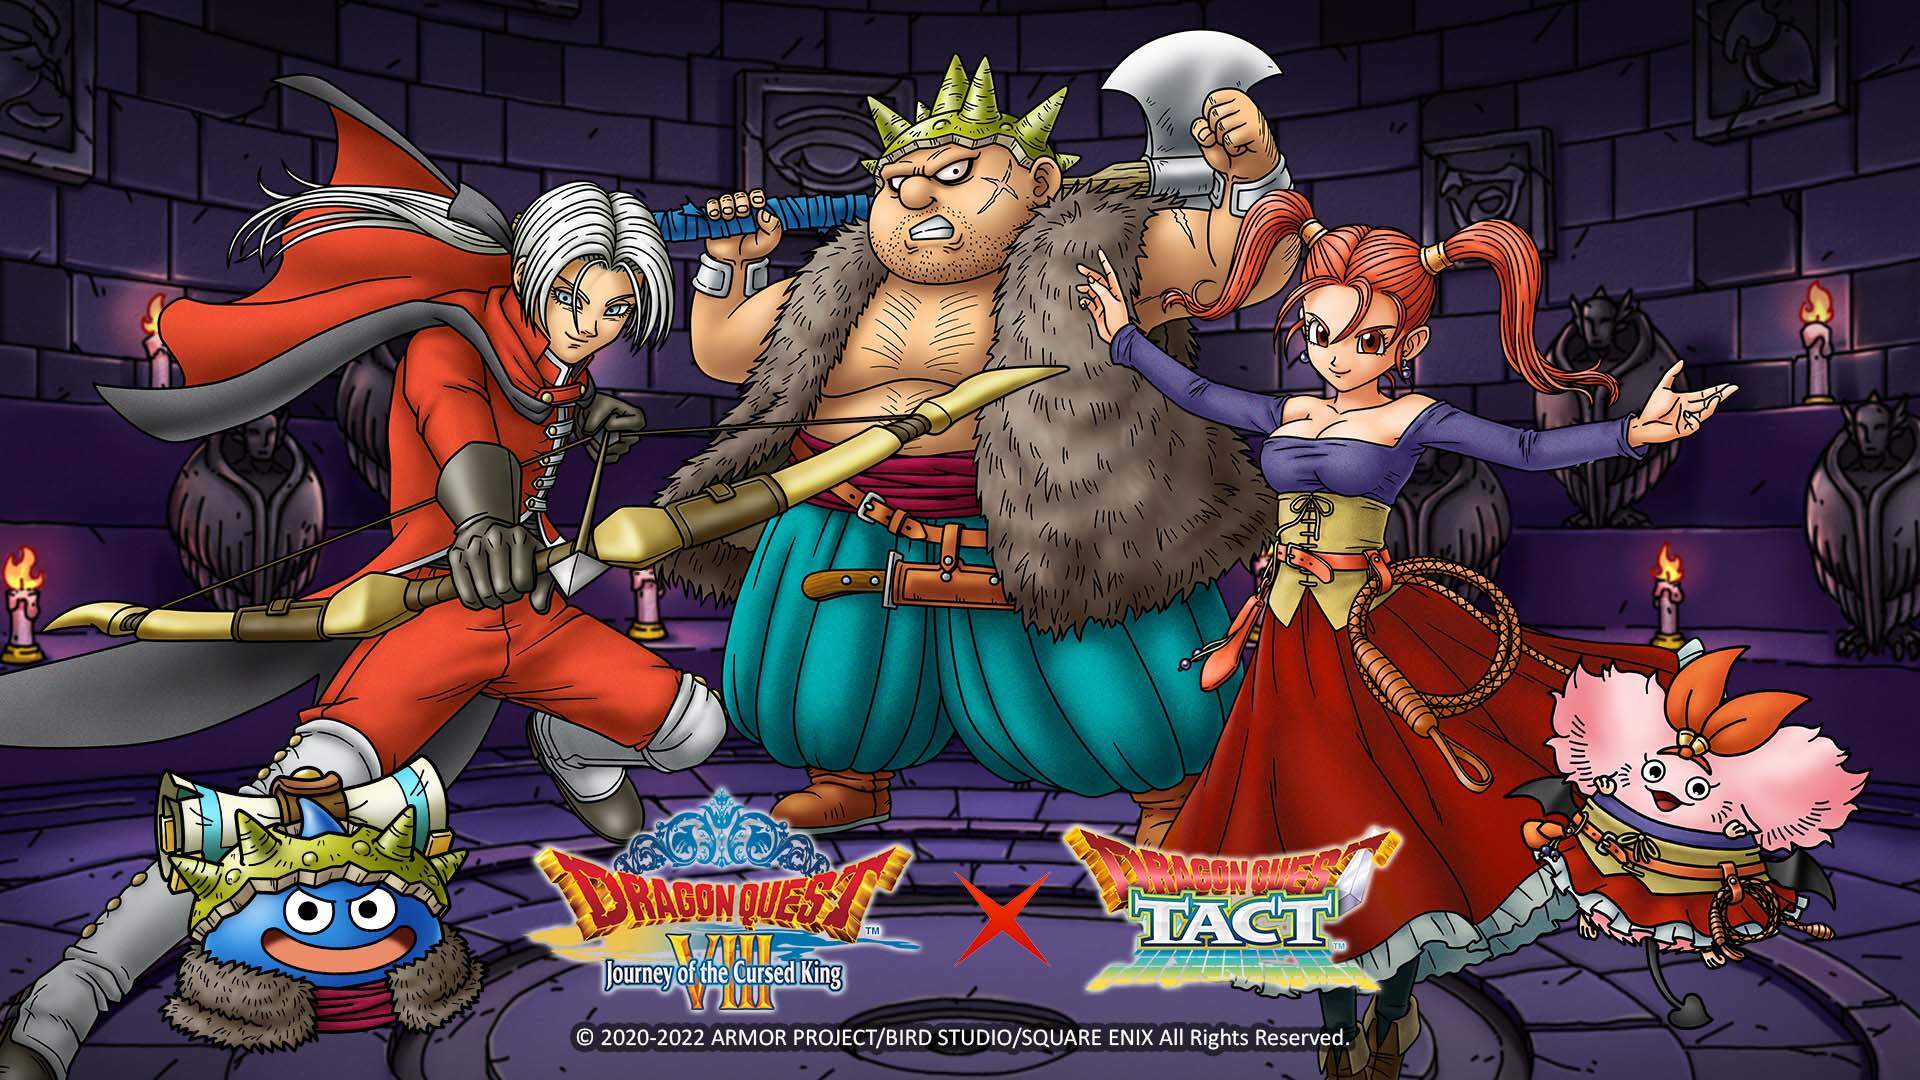 DRAGON QUEST VIII Collaboration Heroes in DRAGON QUEST TACT